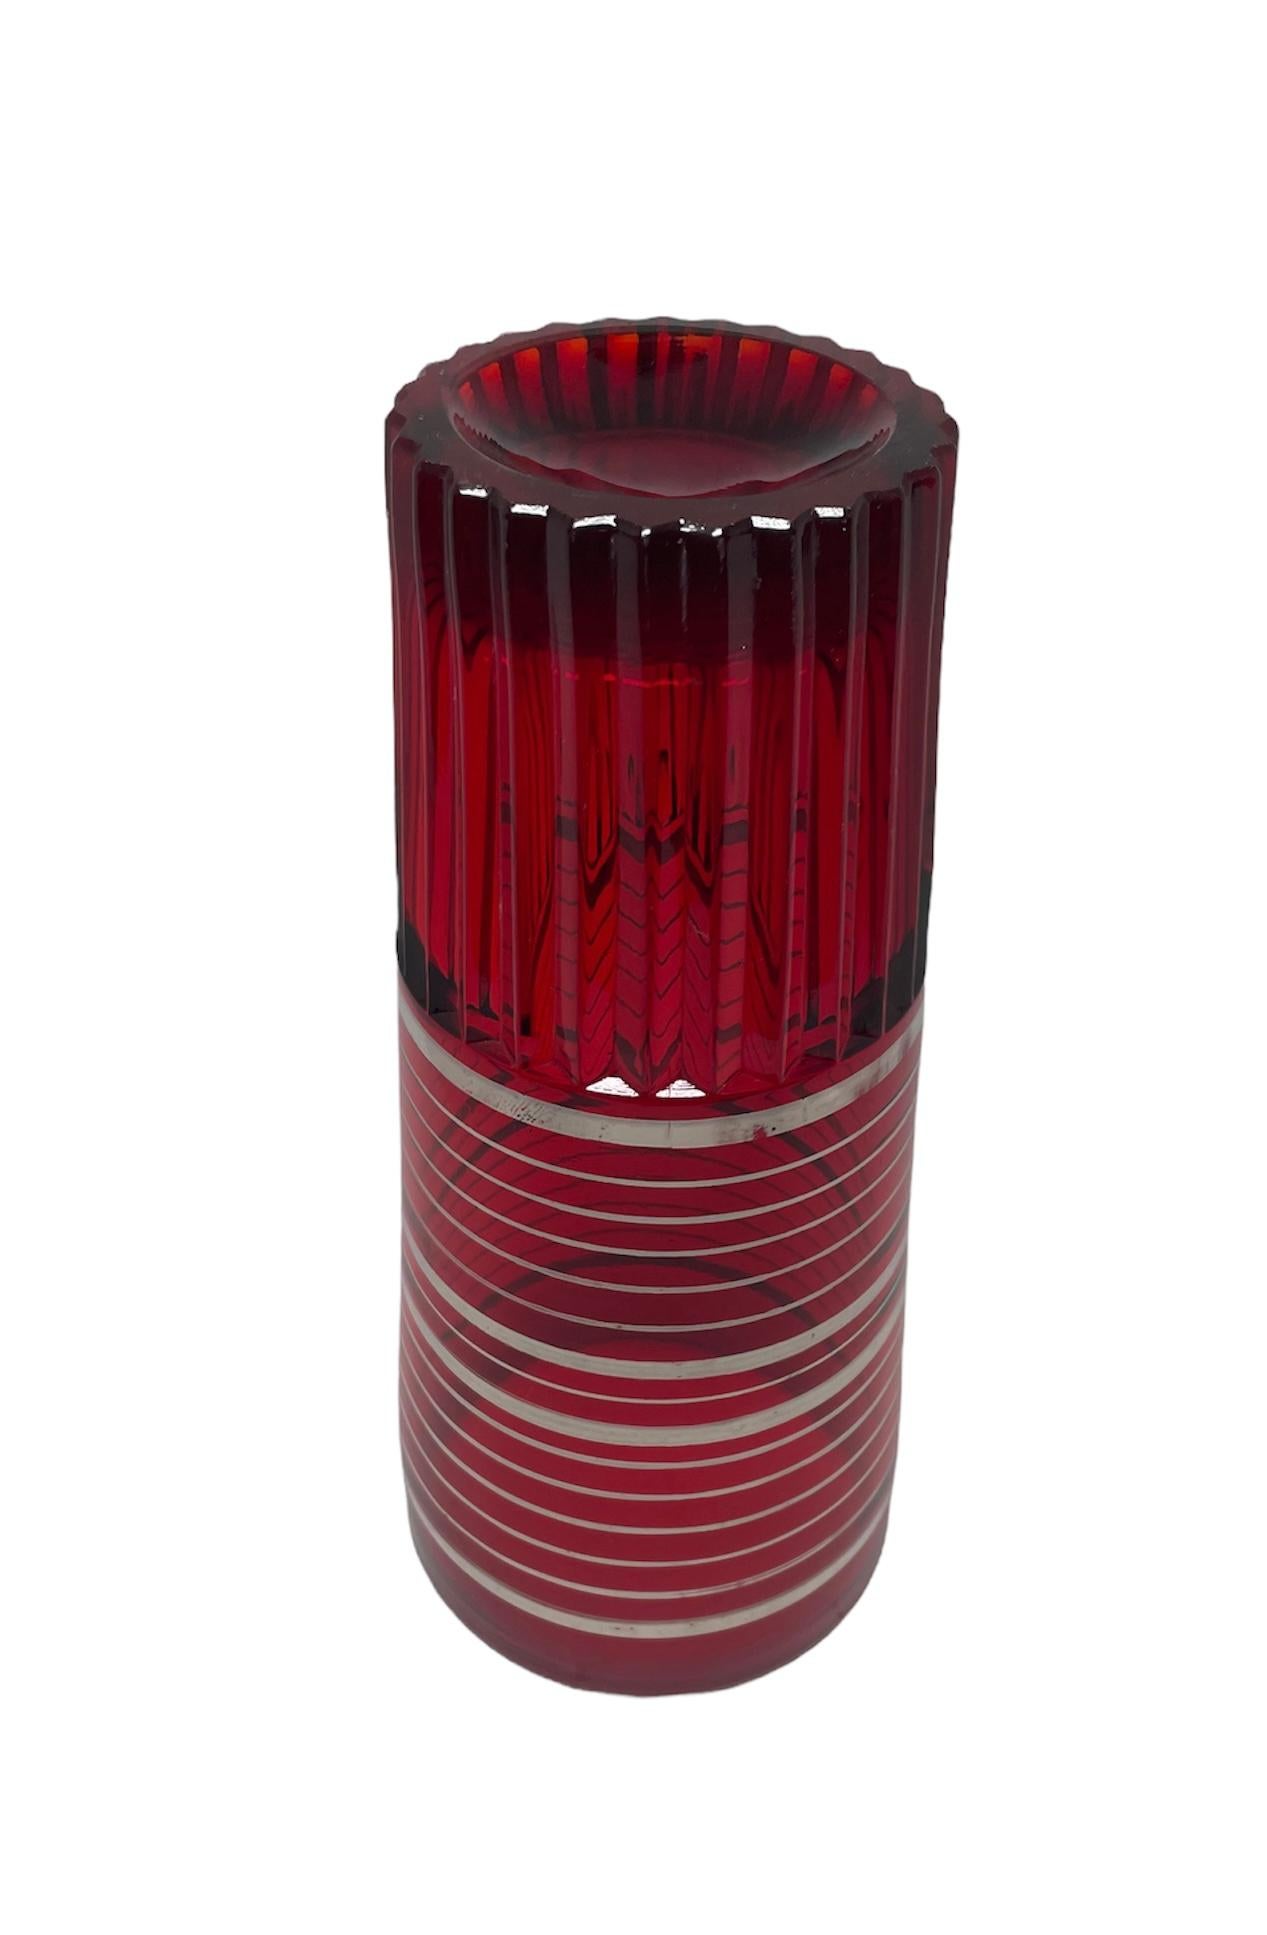 American Set of Paden City Ruby Red Glass Cocktail Shaker and Glasses For Sale